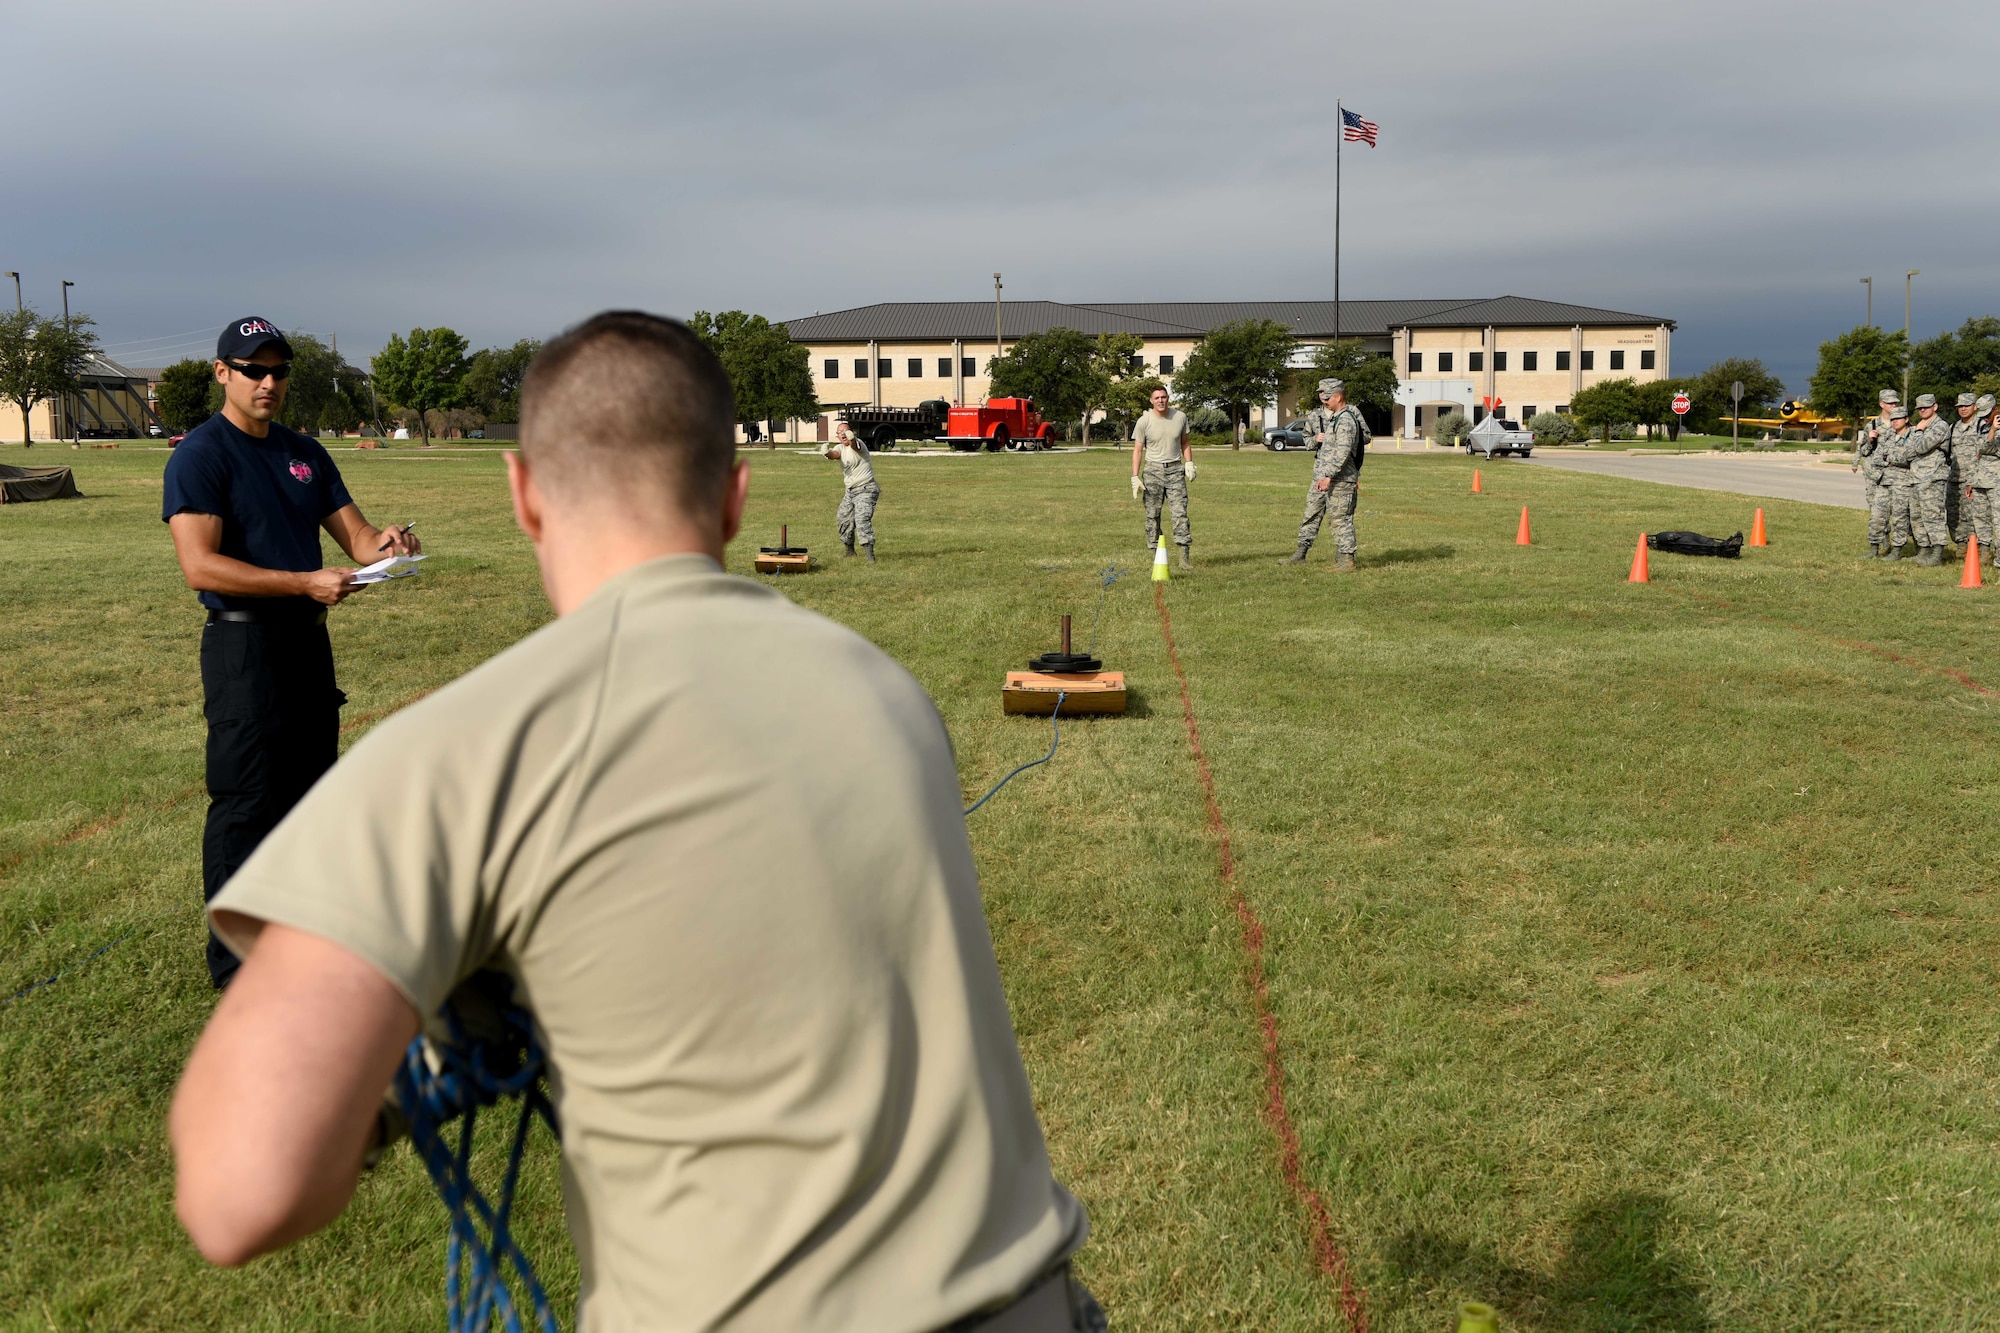 U.S. Air Force Staff Sgt. Zachery Hunsinger, 316th Training Squadron instructor, pulls a weighted sled over 100-foot during the 13th Annual Fire Muster on Goodfellow Air Force Base, Texas, Oct. 12, 2018. This exercise simulates how firefighters train to carry heavy objects over long, difficult terrain. (U.S. Air Force photo by Senior Airman Randall Moose/Released)